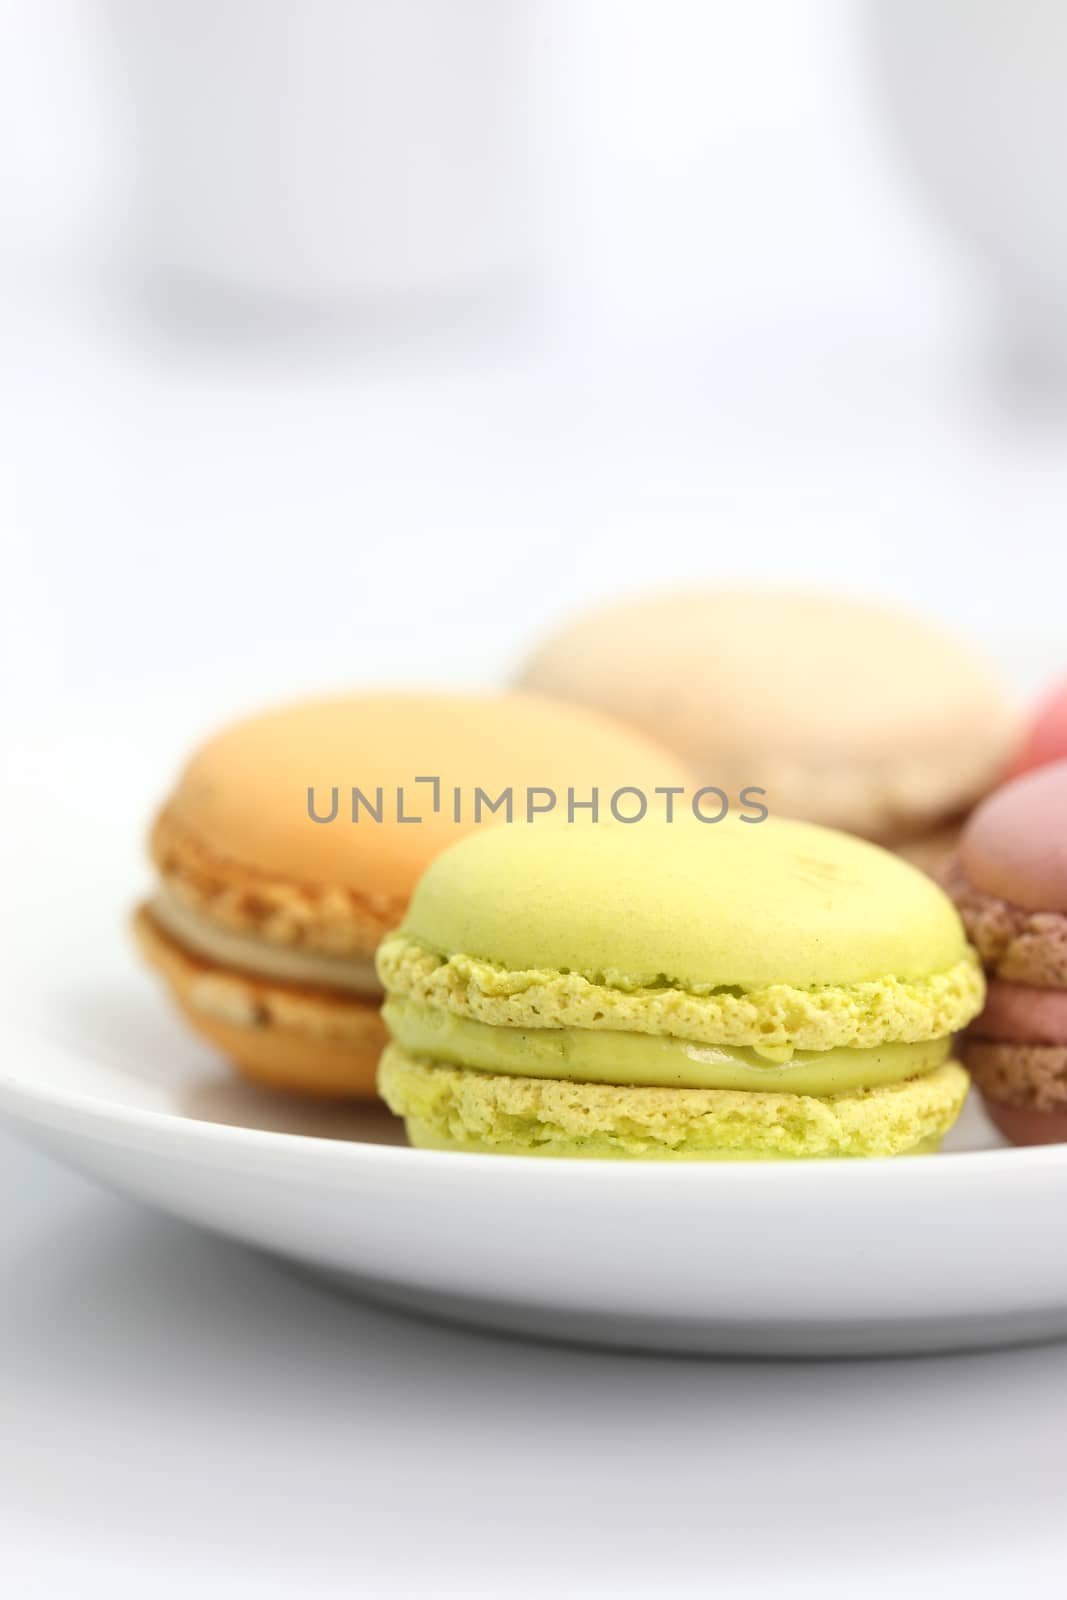 Colorful Macaron in close up isolated on white background by piyato